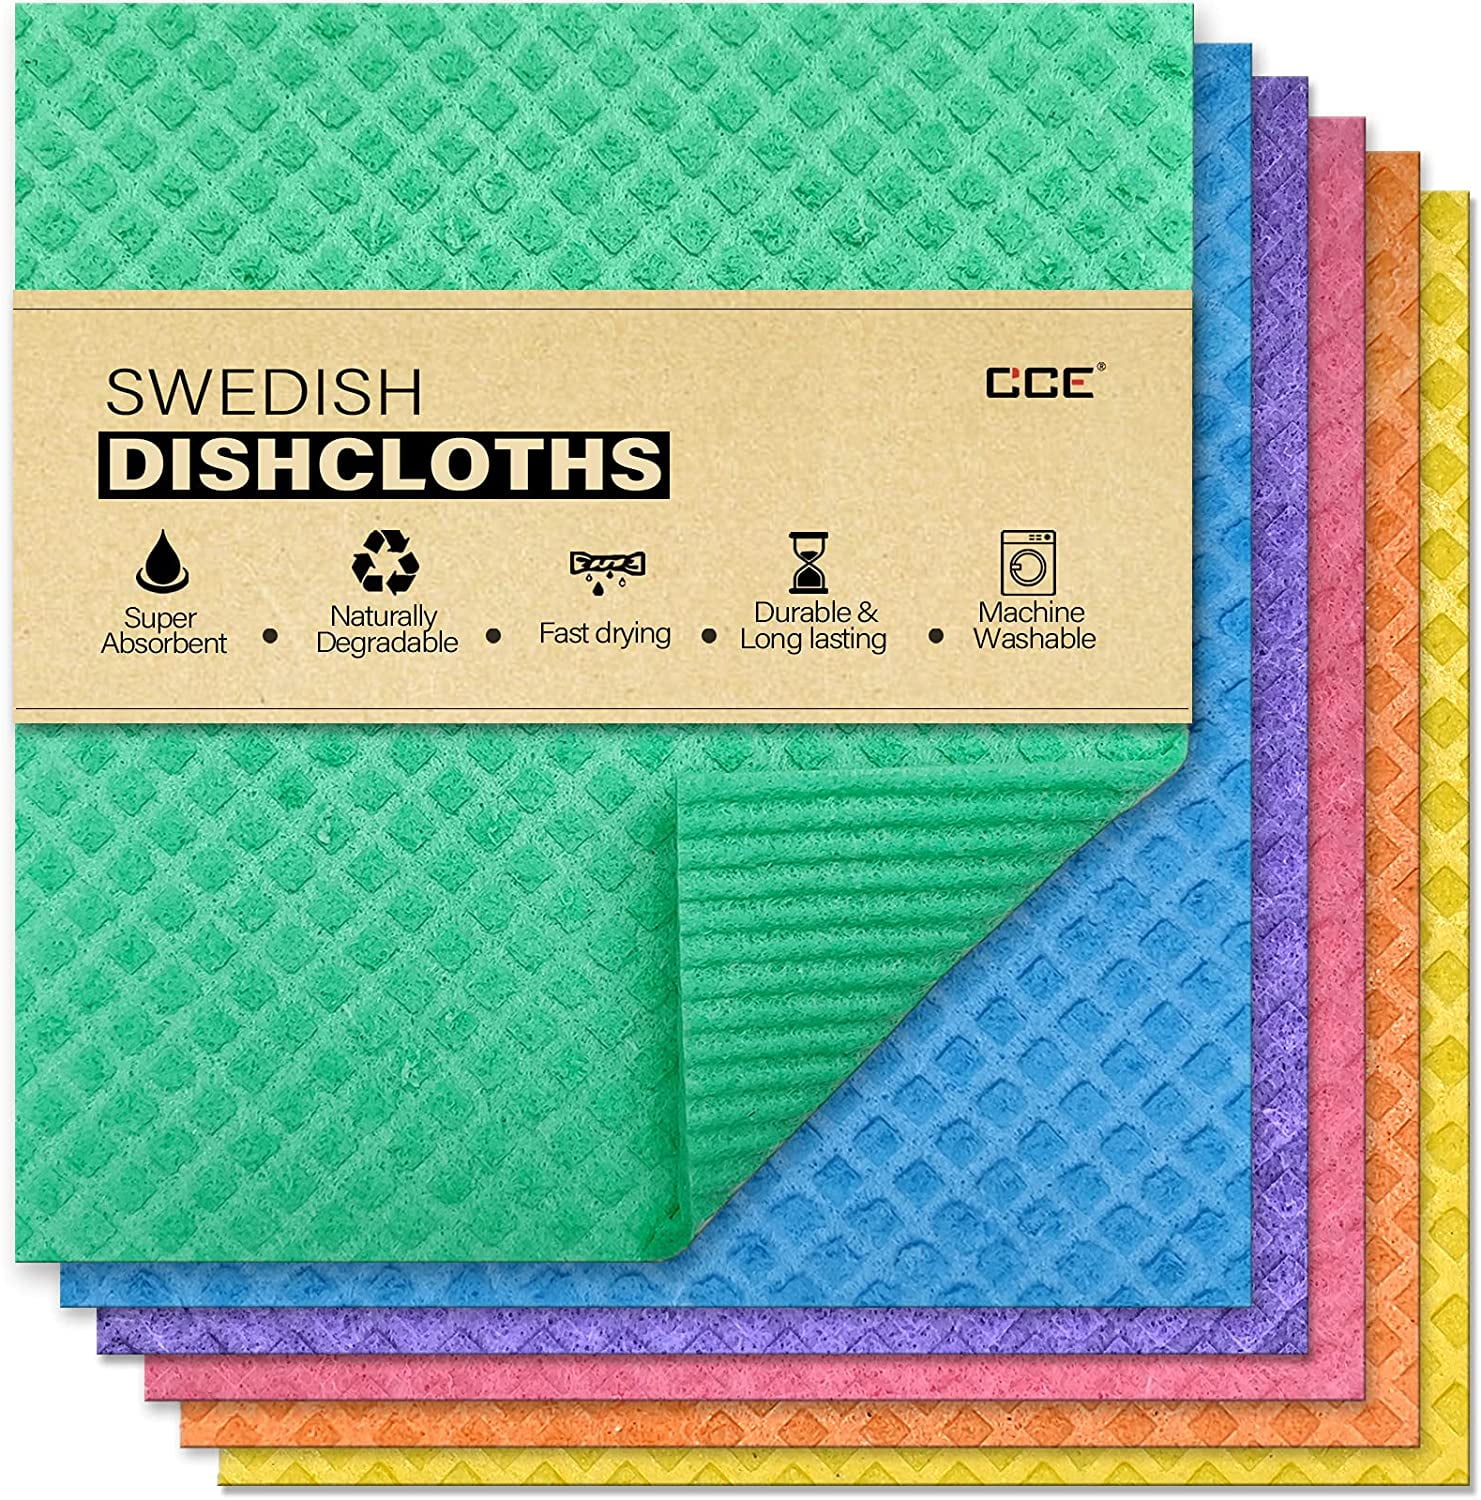 Counter Wipes Hand 6 Pieces Swedish Kitchen Dishcloths Mixed Trees Kitchen Cleaning Cloths Absorbent Cleaning Cloth Set Swedish Kitchen Dishcloths Quick Drying Reusable Cloths for Kitchen 